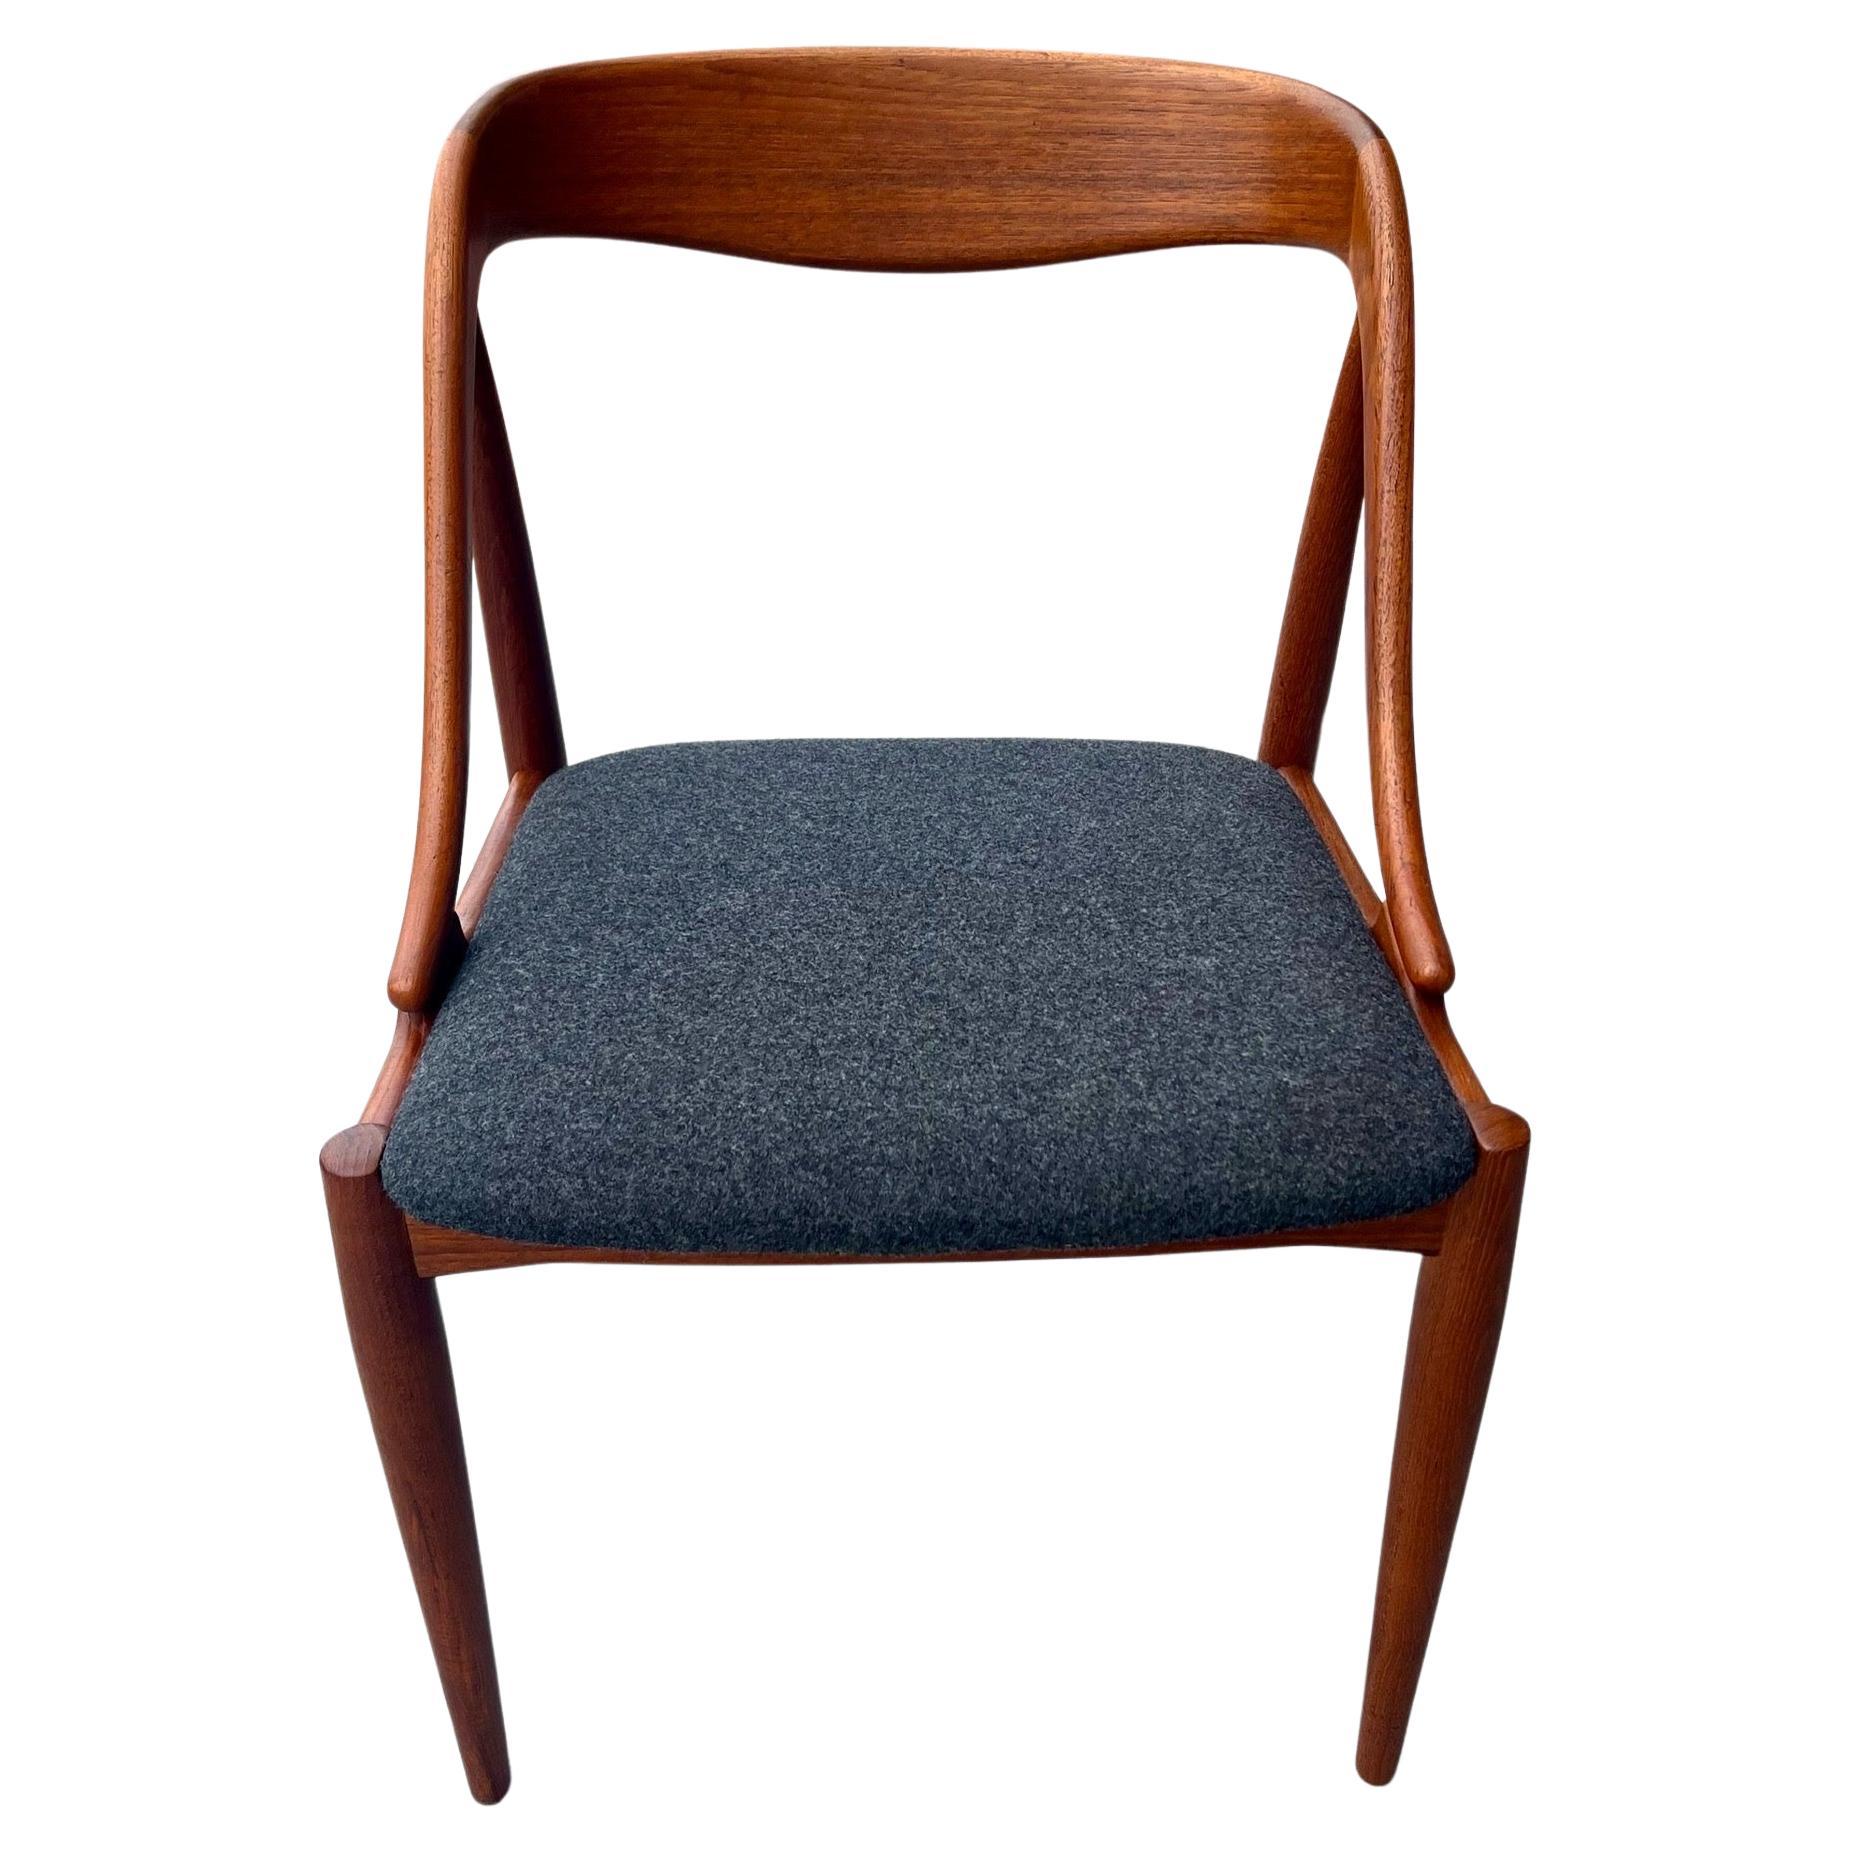 Mid-Century Danish Model 16 dining chair designed by Johannes Andersen For Uldum Møbelfabrik, 1950s, set of 4. These chair has been refinished and recover in beautiful Knoll wool fabric , this chair is solid and sturdy elegant and beautiful.